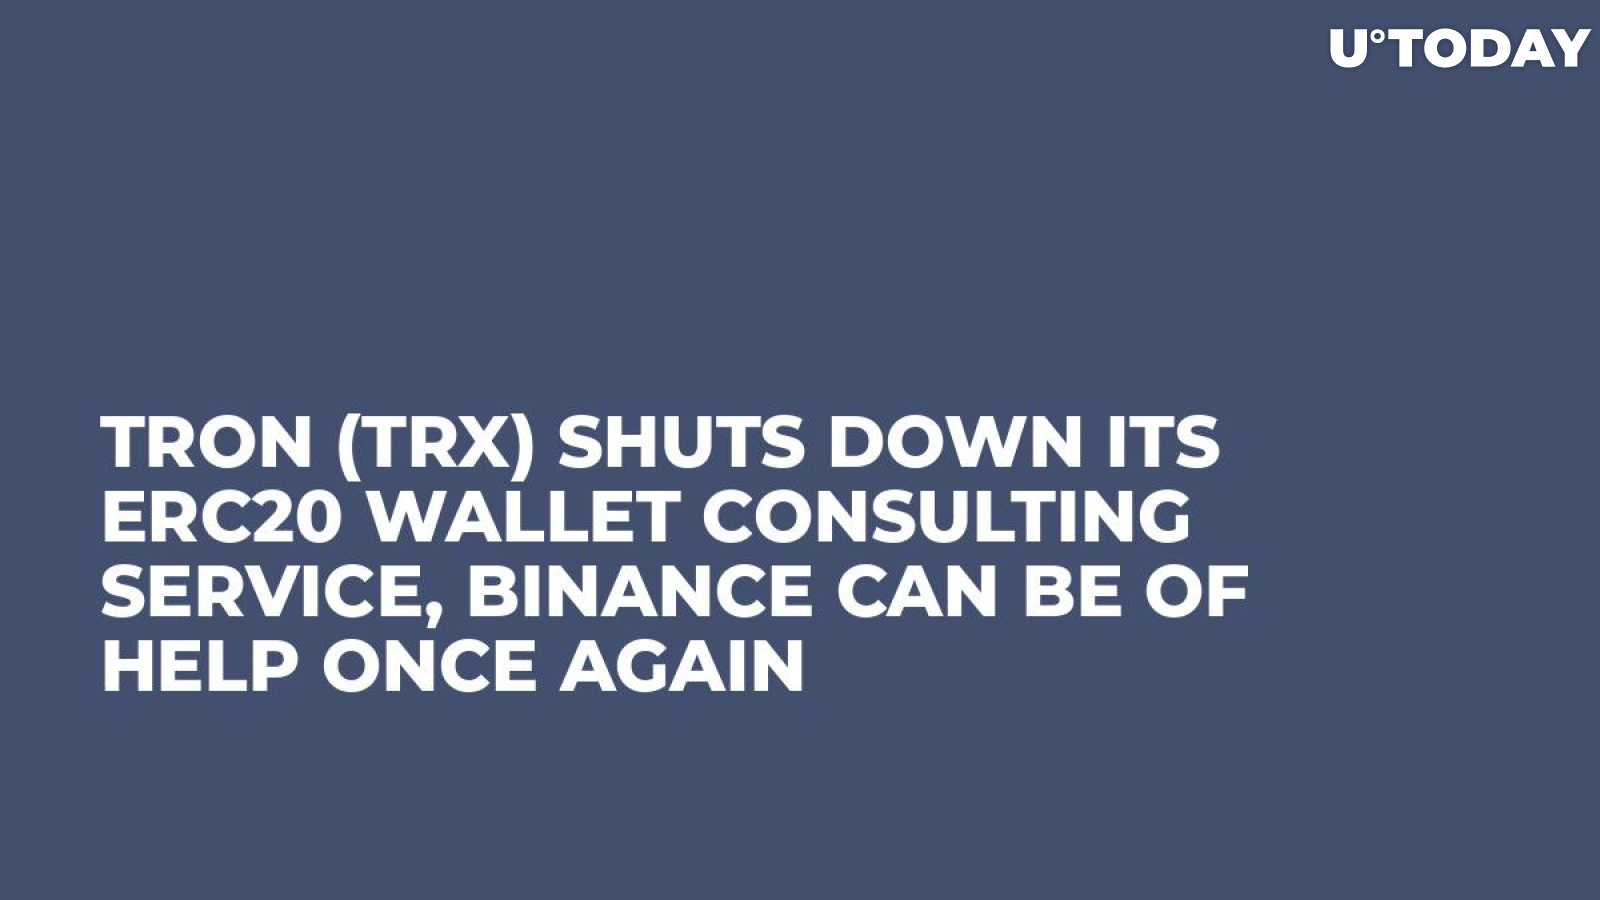 Tron (TRX) Shuts Down Its ERC20 Wallet Consulting Service, Binance Can Be of Help Once Again